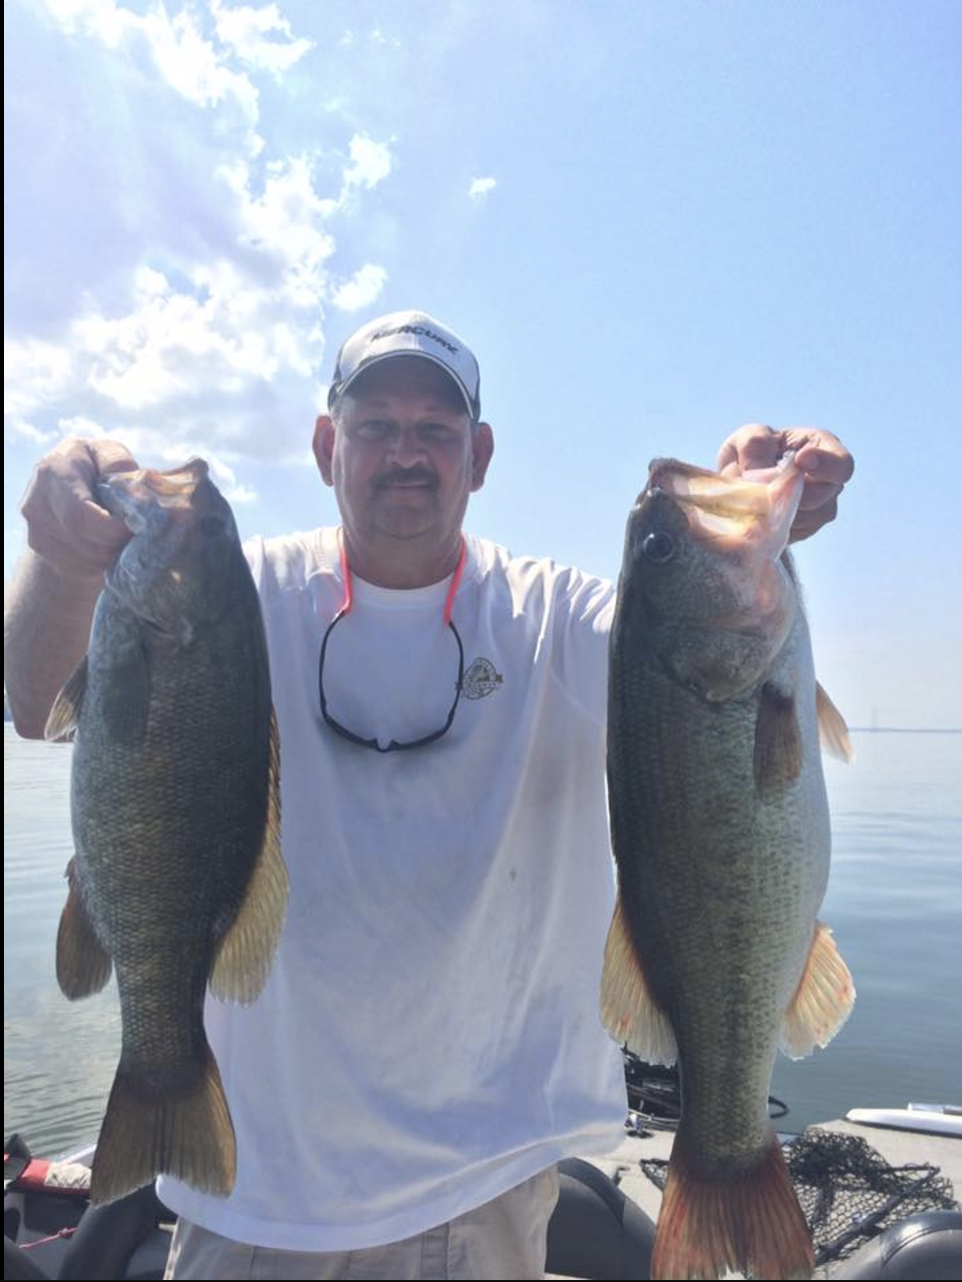 Bassmaster.com asked folks fishing during the eclipse to give us an update. Here Jamie Smith responded on Facebook that 